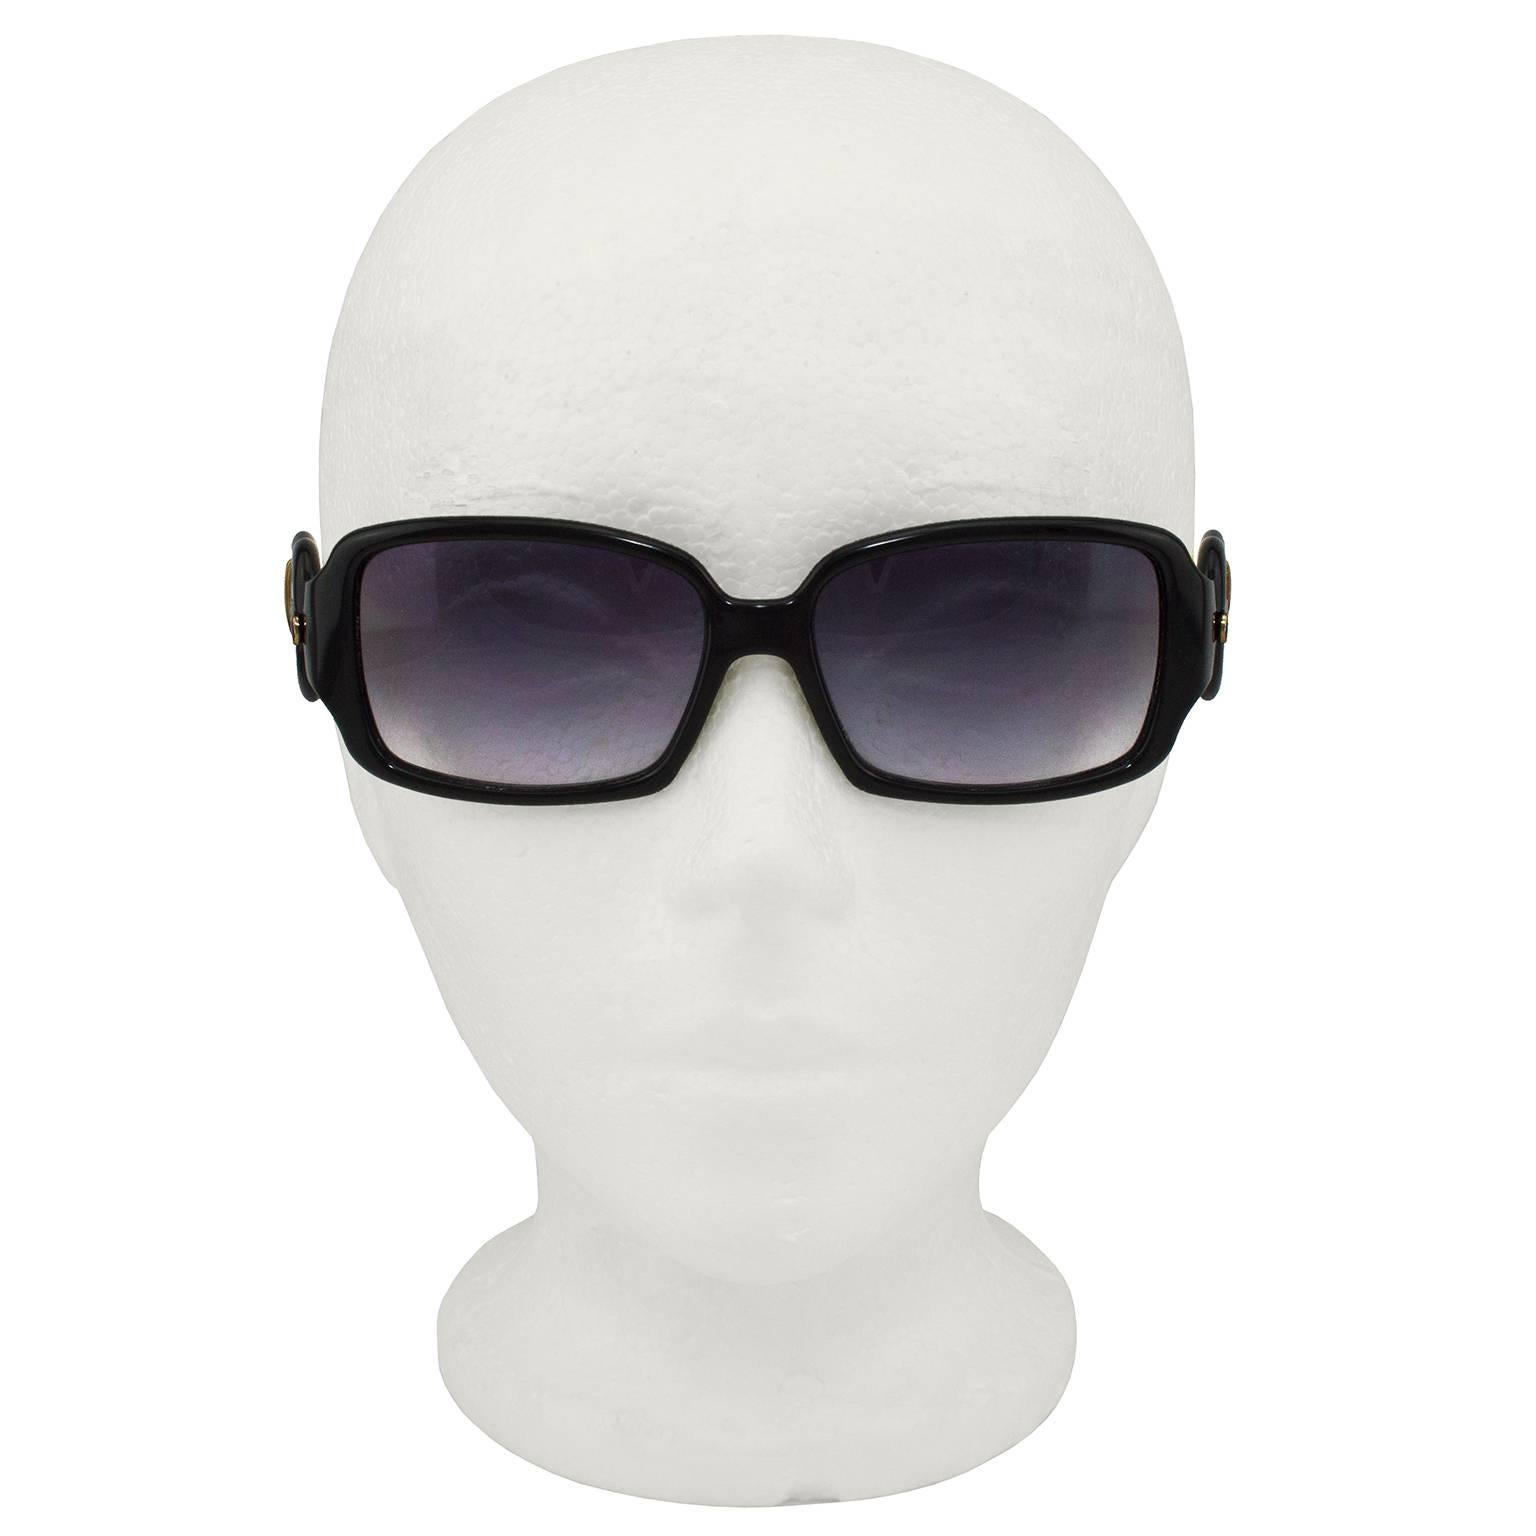 Fendi sunglasses from the 2000s. Black frames with cream arms and large buckle details and bronze hardware. Buckle details are iconic to Fendi and made famous by the B. Fendi bag. Faux stitching details on arms and brand/style info stamped in black